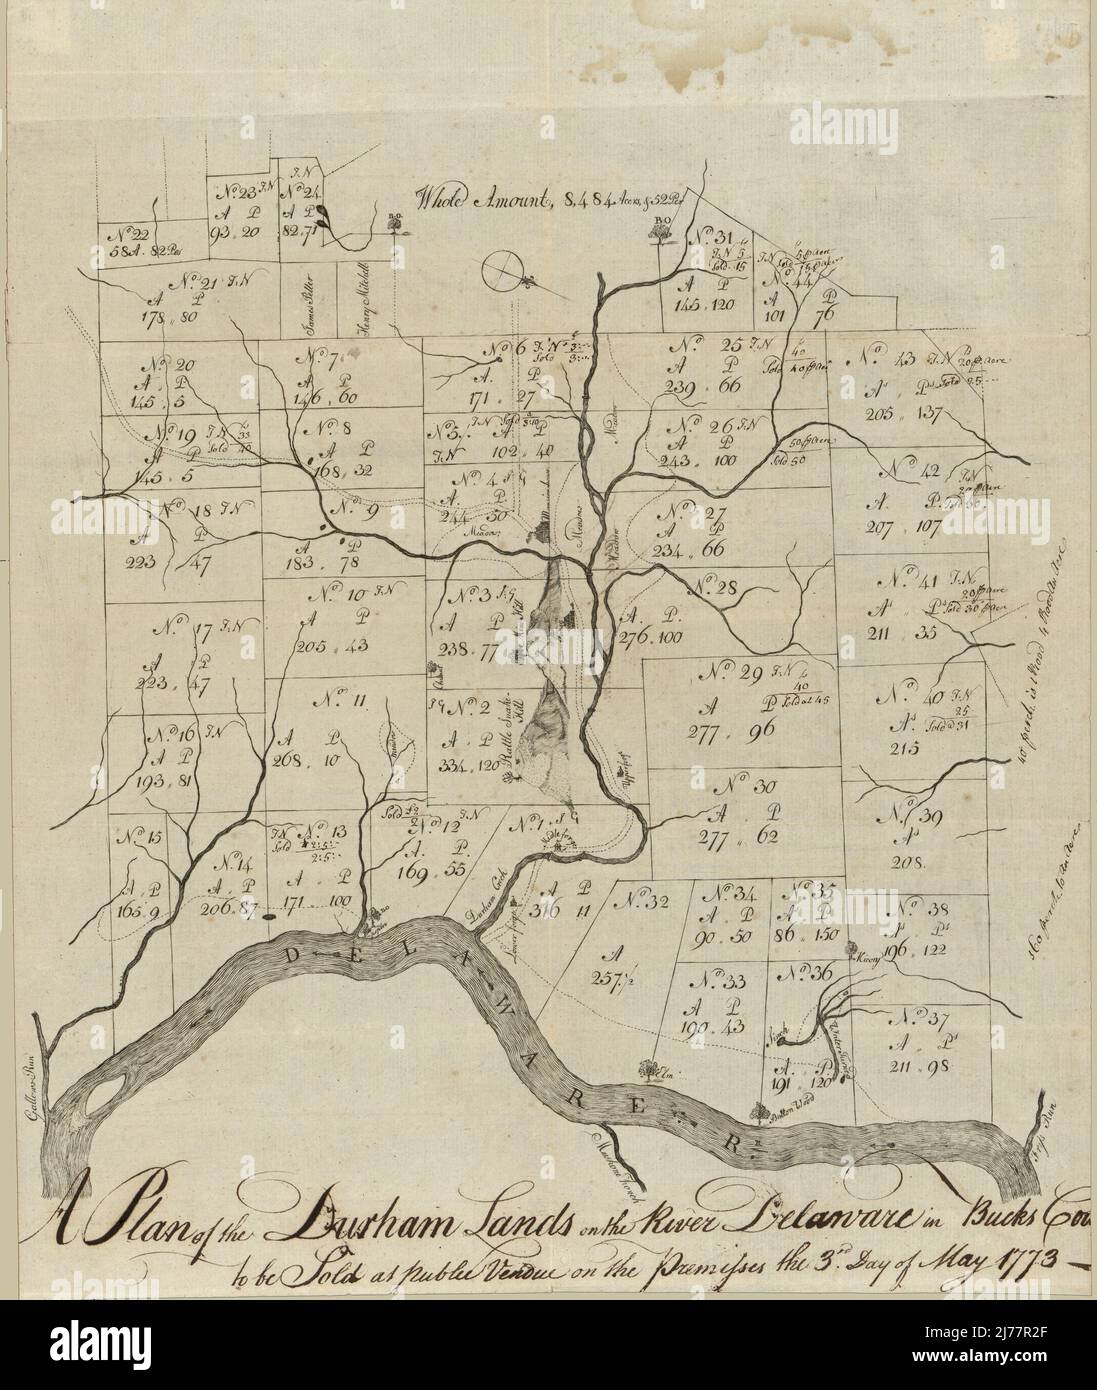 A Plan of the Durham lands on the River Delaware in Bucks Cou(nty) - to be sold at public vendue on the premisses the 3rd day of May 1773. LOC 88694000 Stock Photo